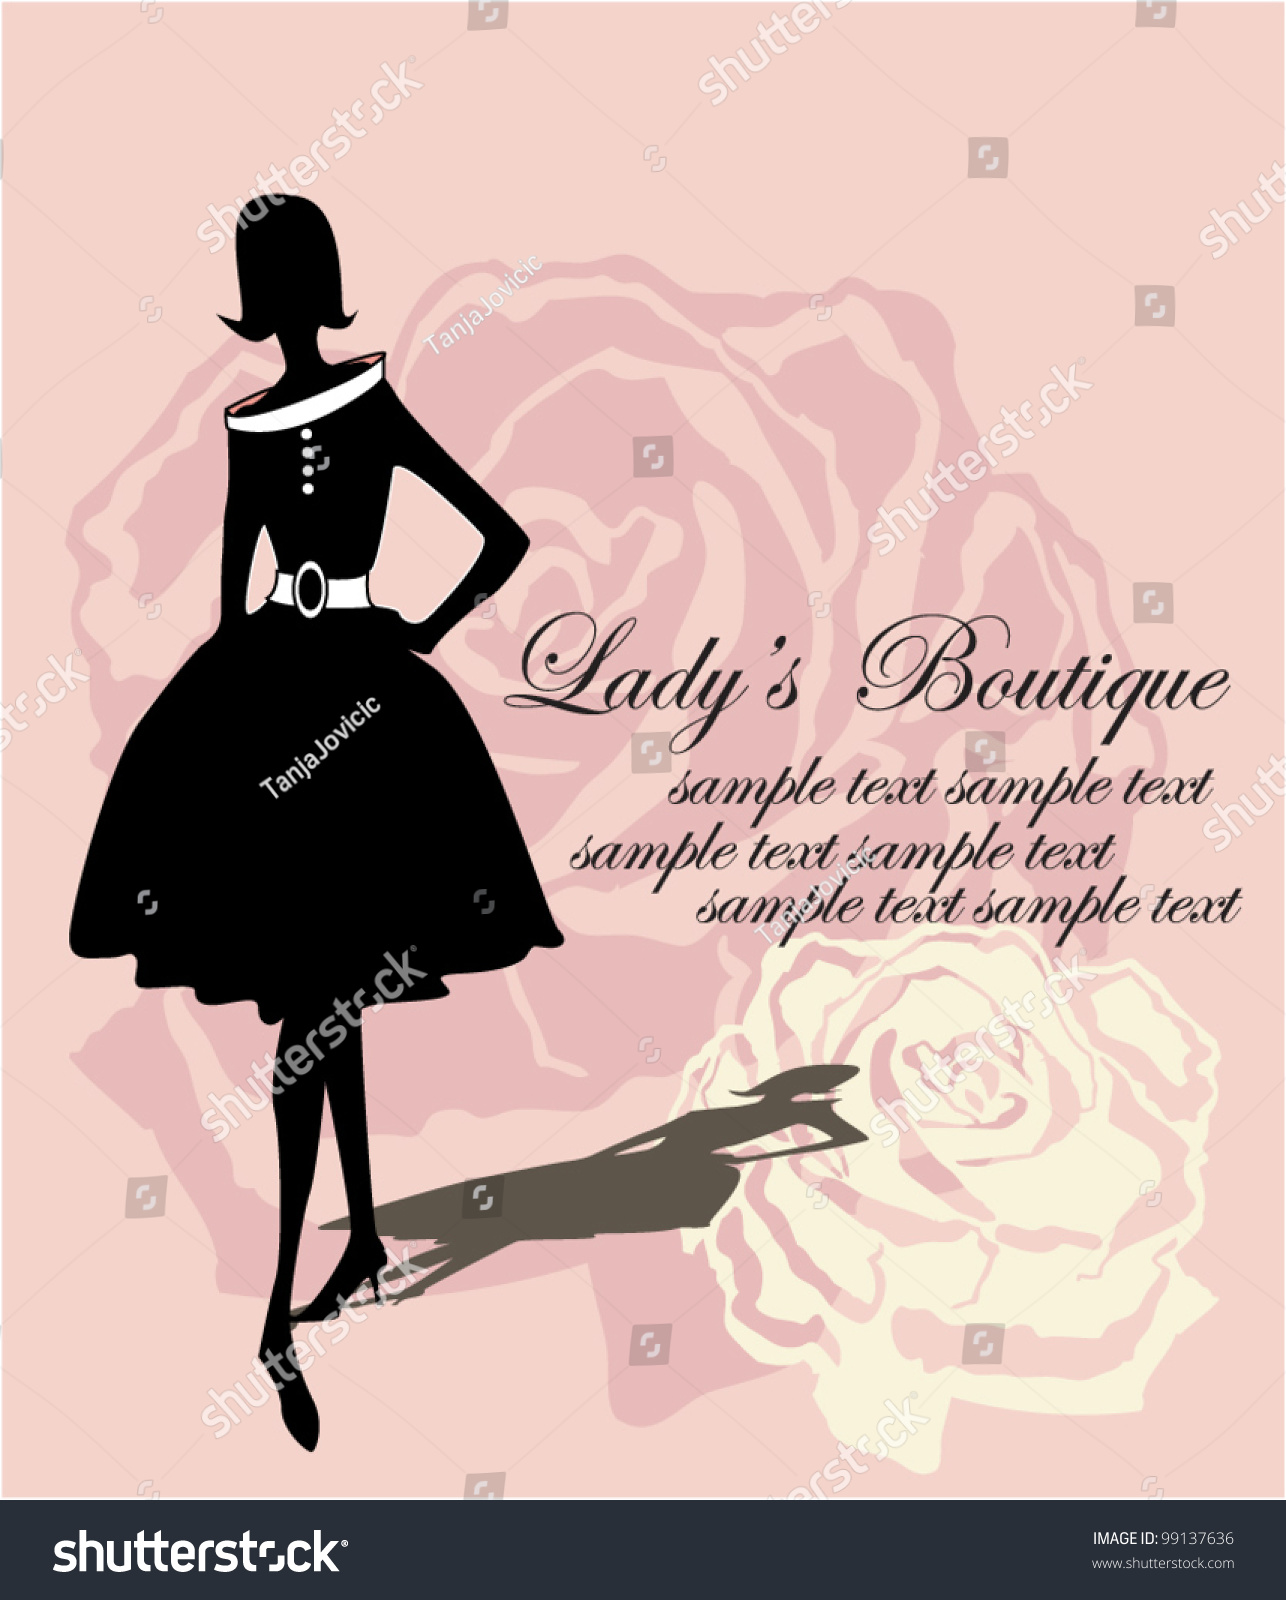 SVG of silhouette on a rose background svg